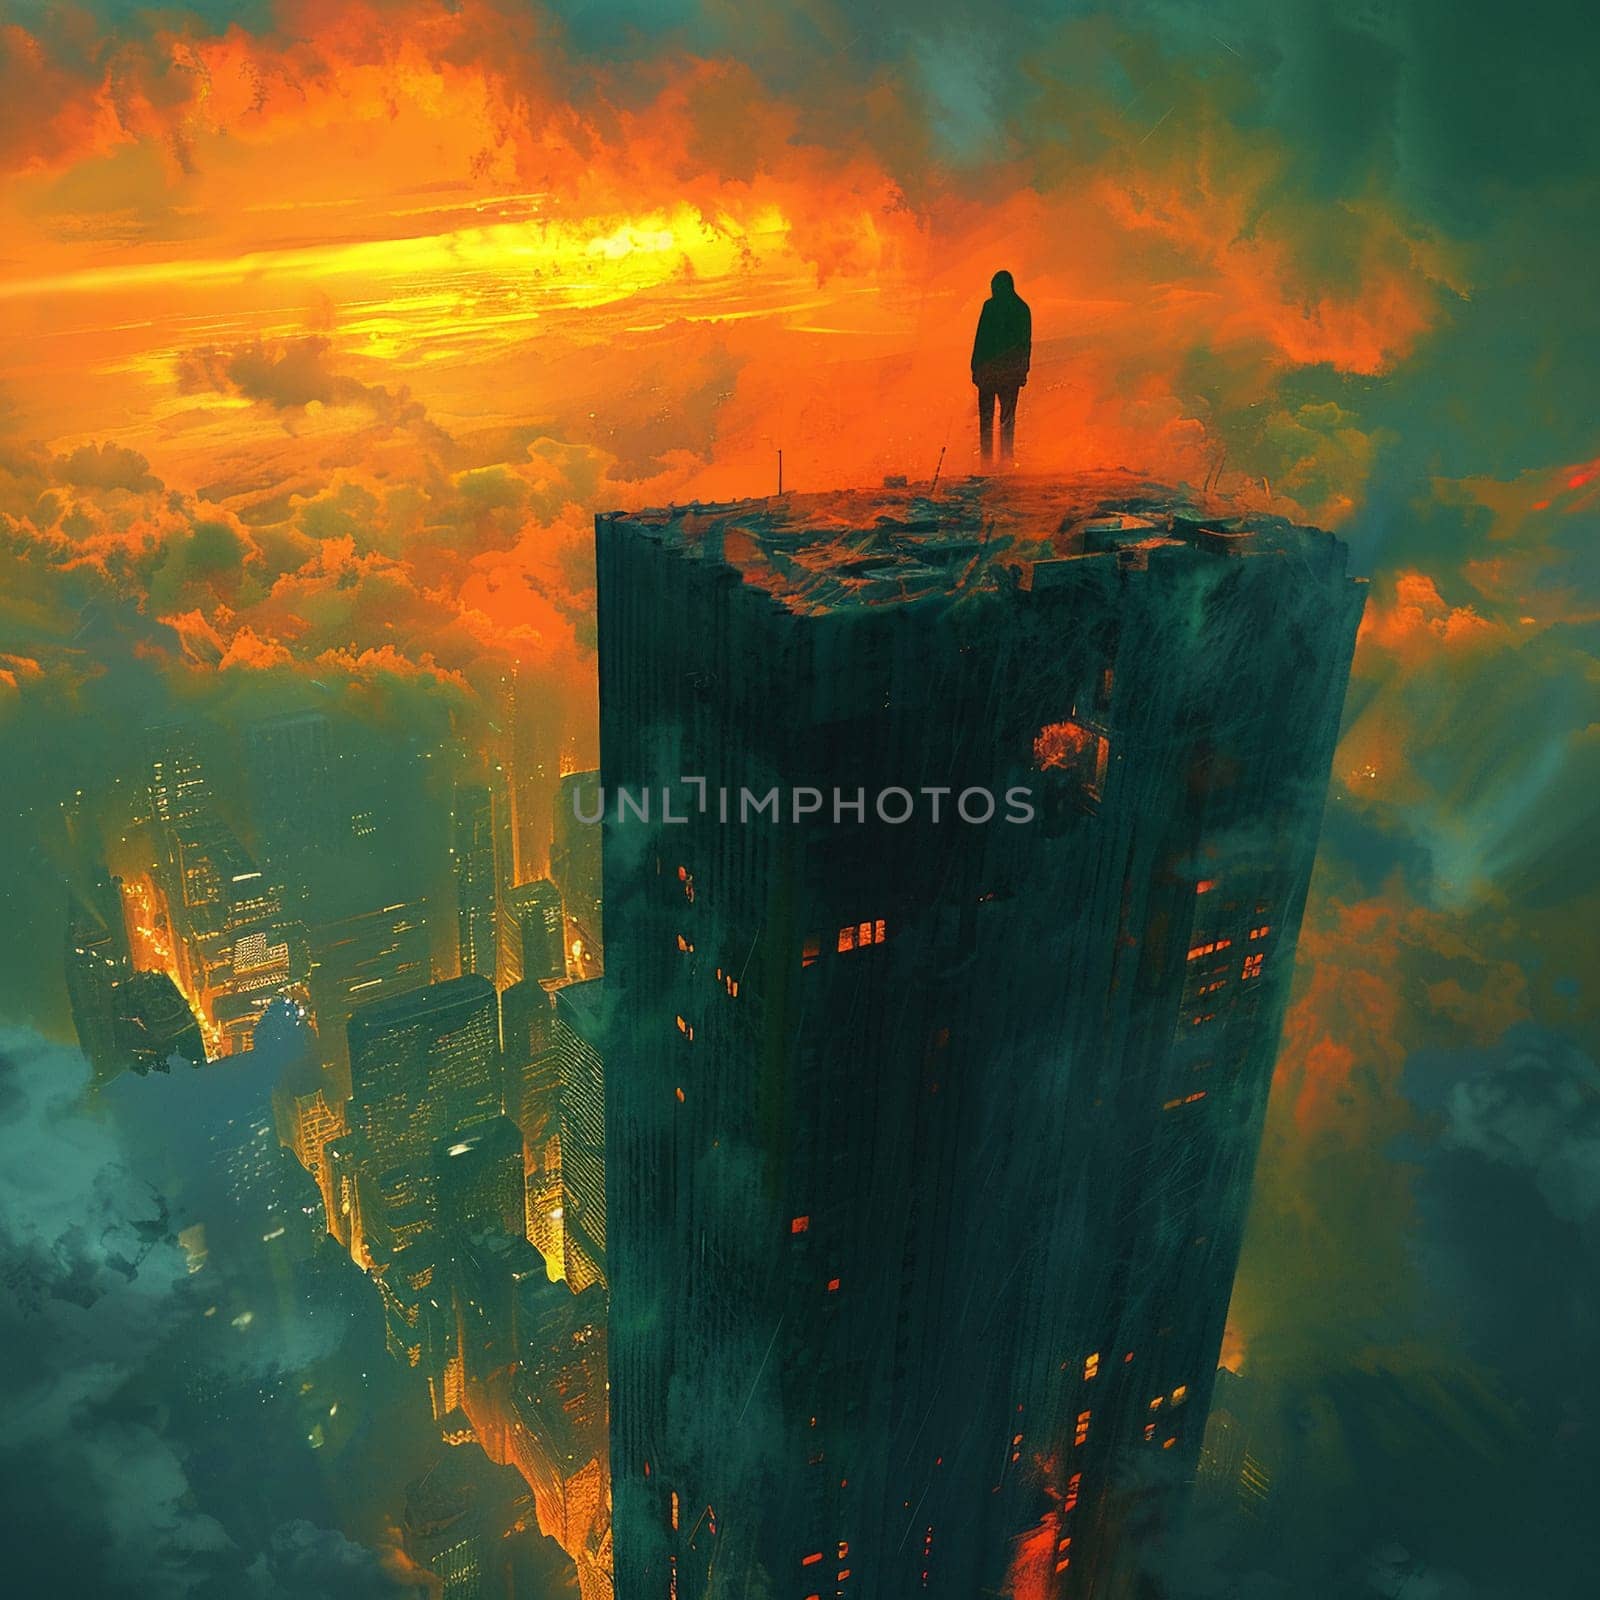 Figure atop a skyscraper painted with a dynamic perspective and dramatic chiaroscuro in digital art.